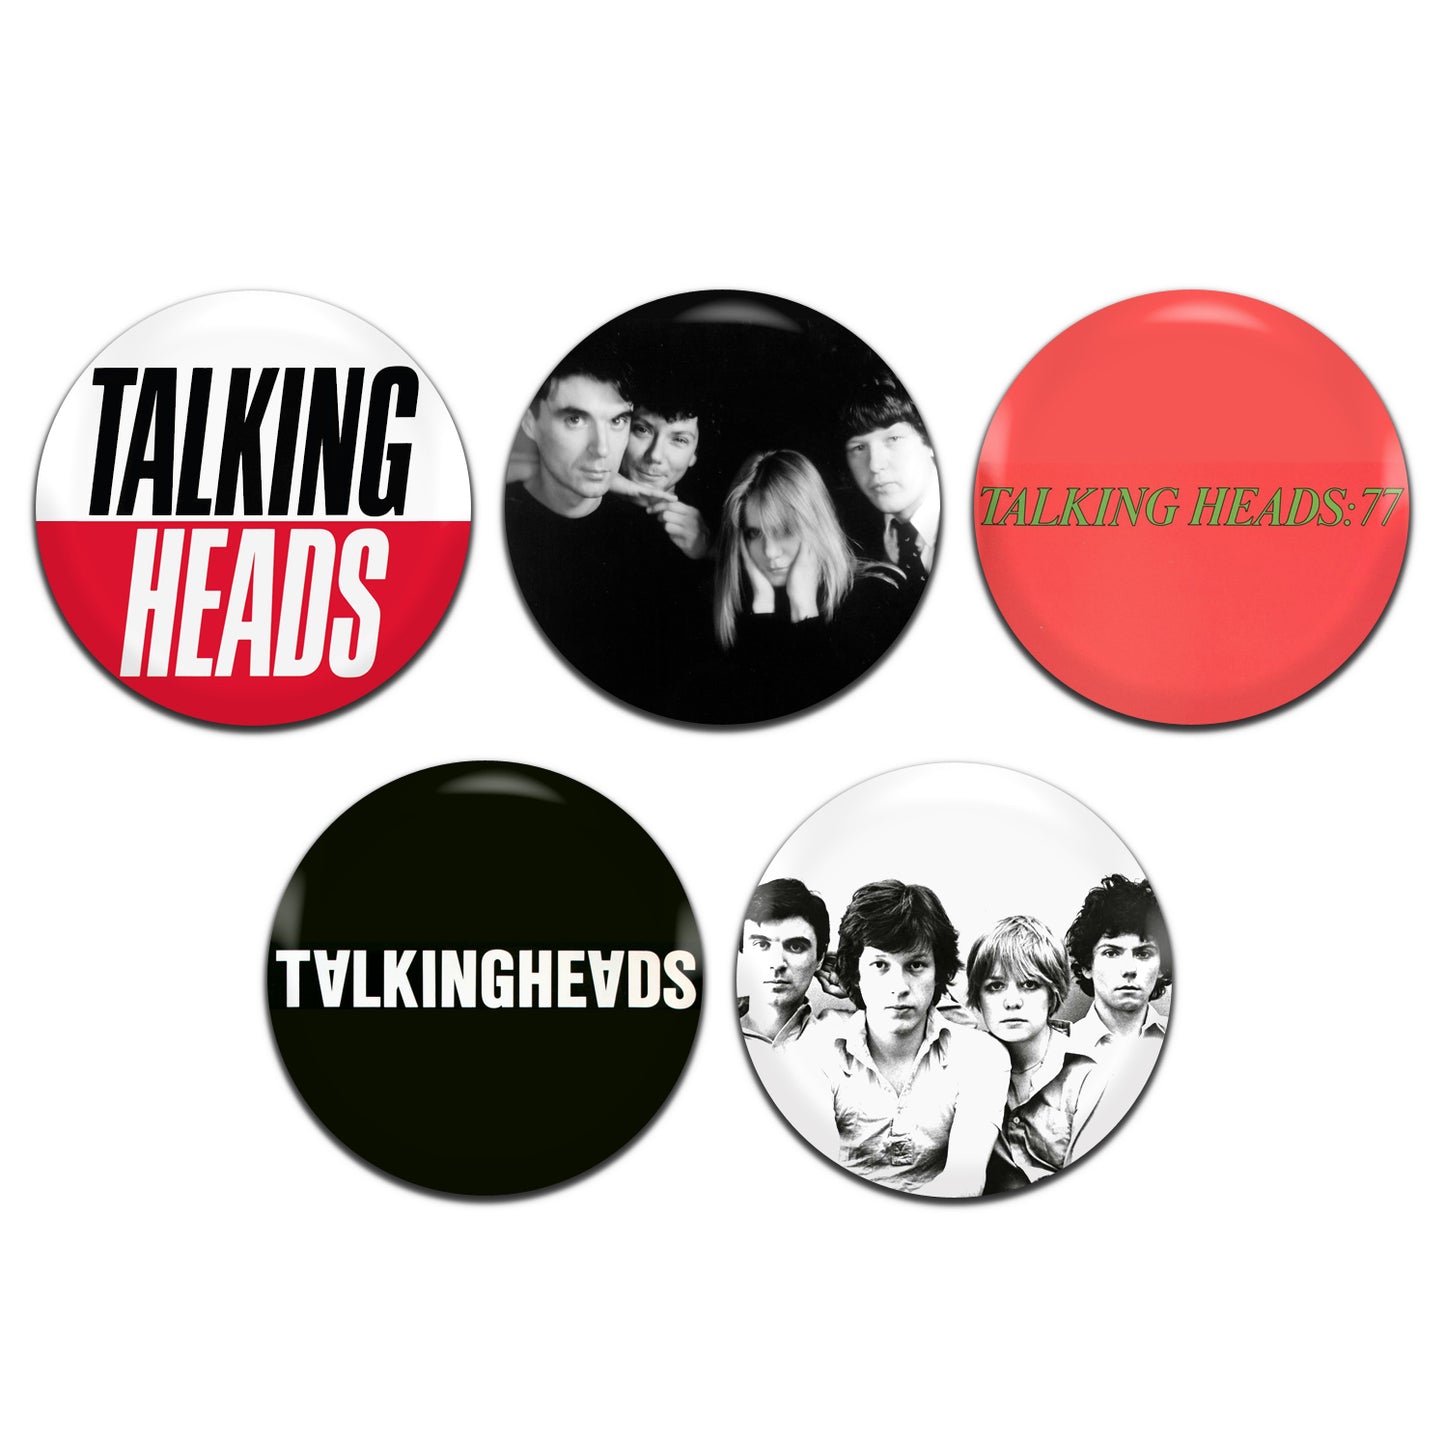 Talking Heads Punk Rock New Wave 70's 80's 25mm / 1 Inch D-Pin Button Badges (5x Set)